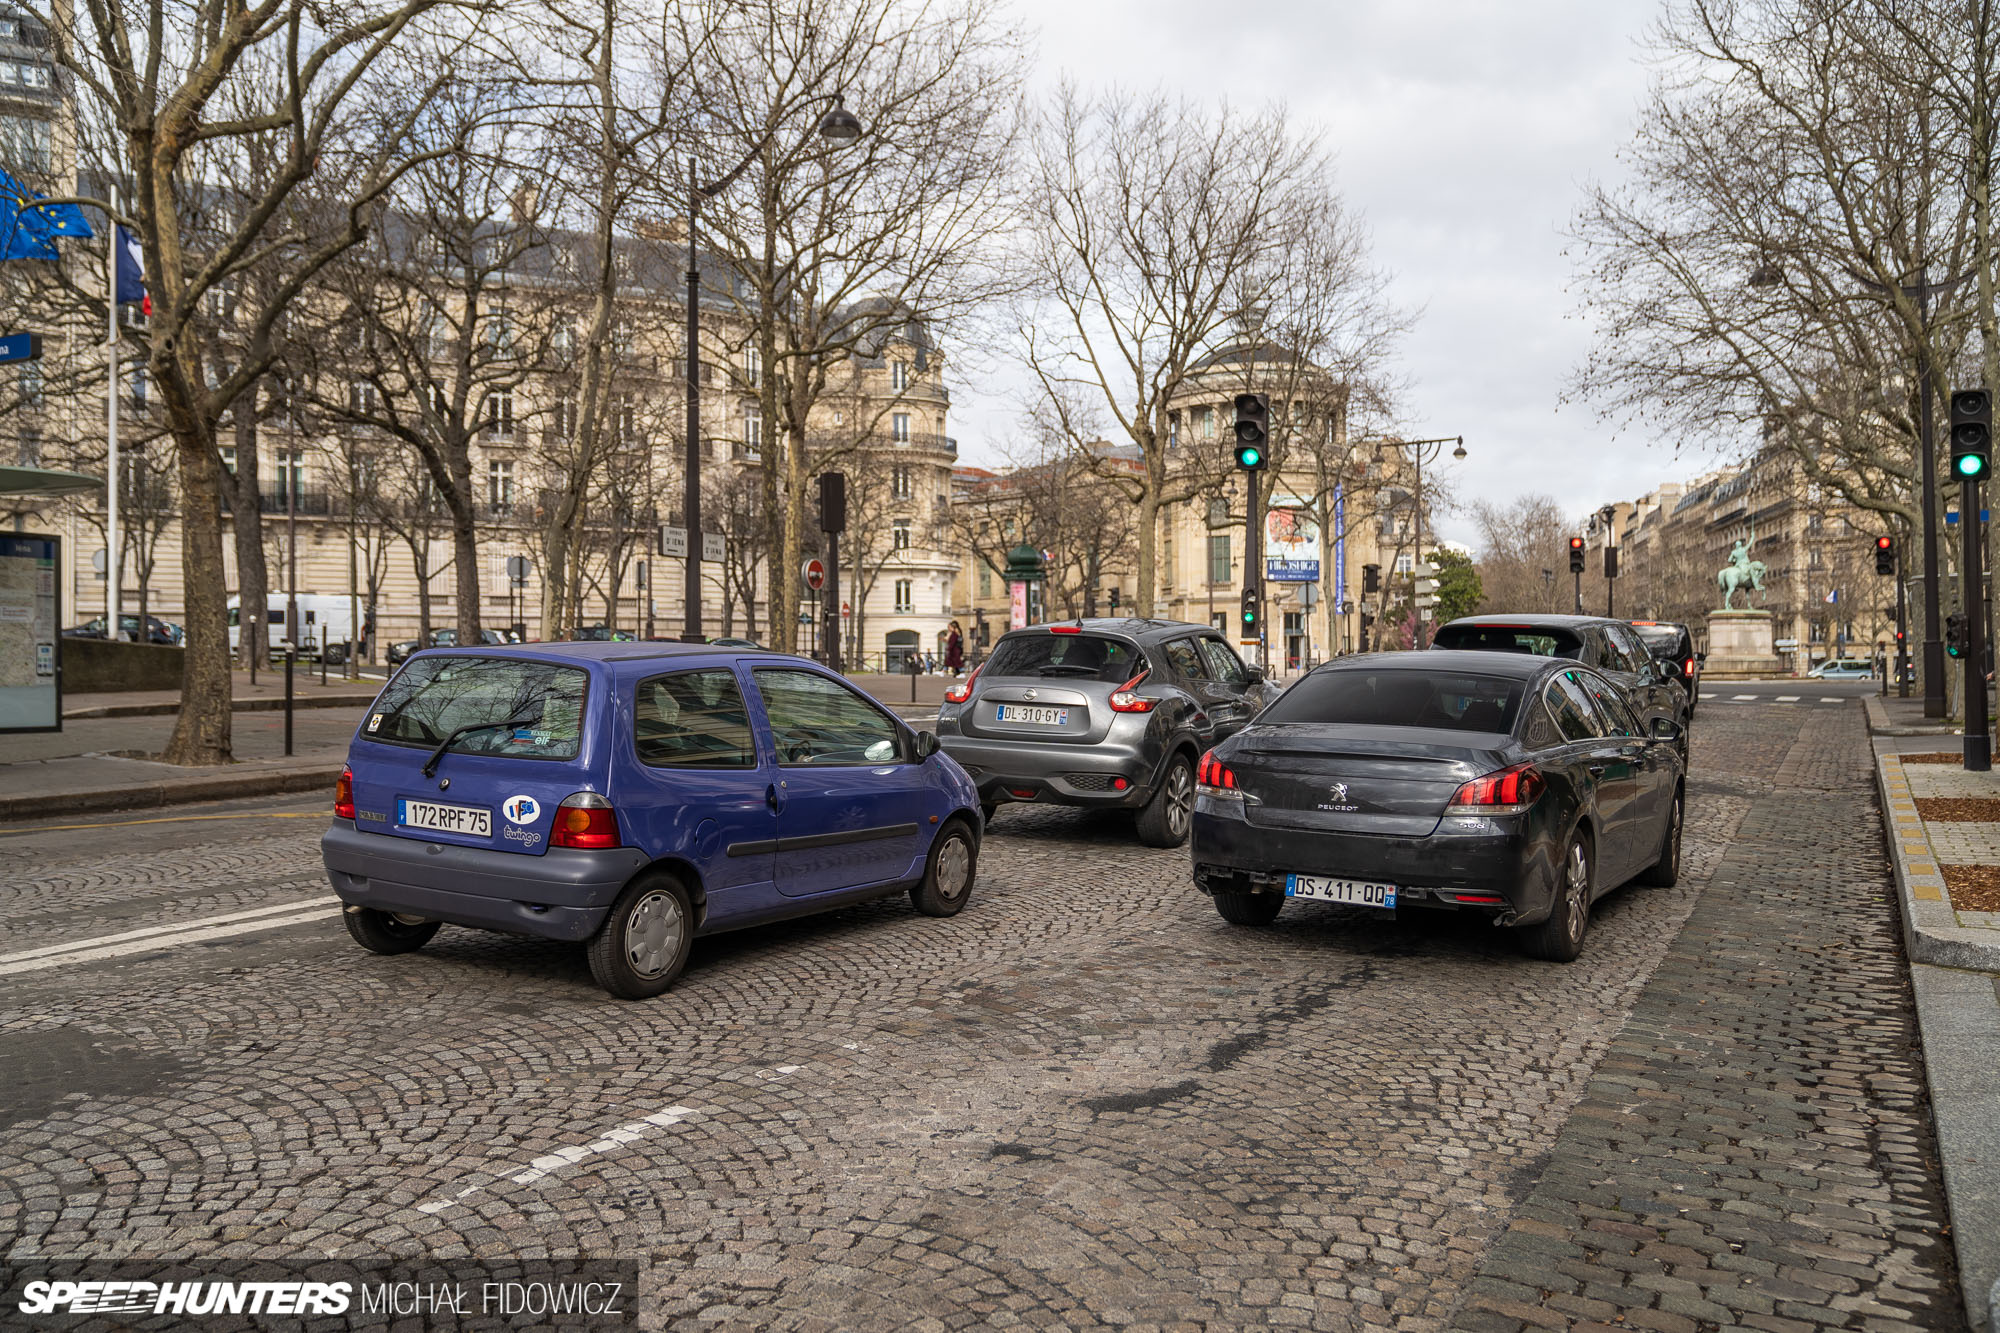 plaques, passion, paris, of, mildly, interesting, hatchbacks, french, france, culture, carspotting, cars, from paris with love